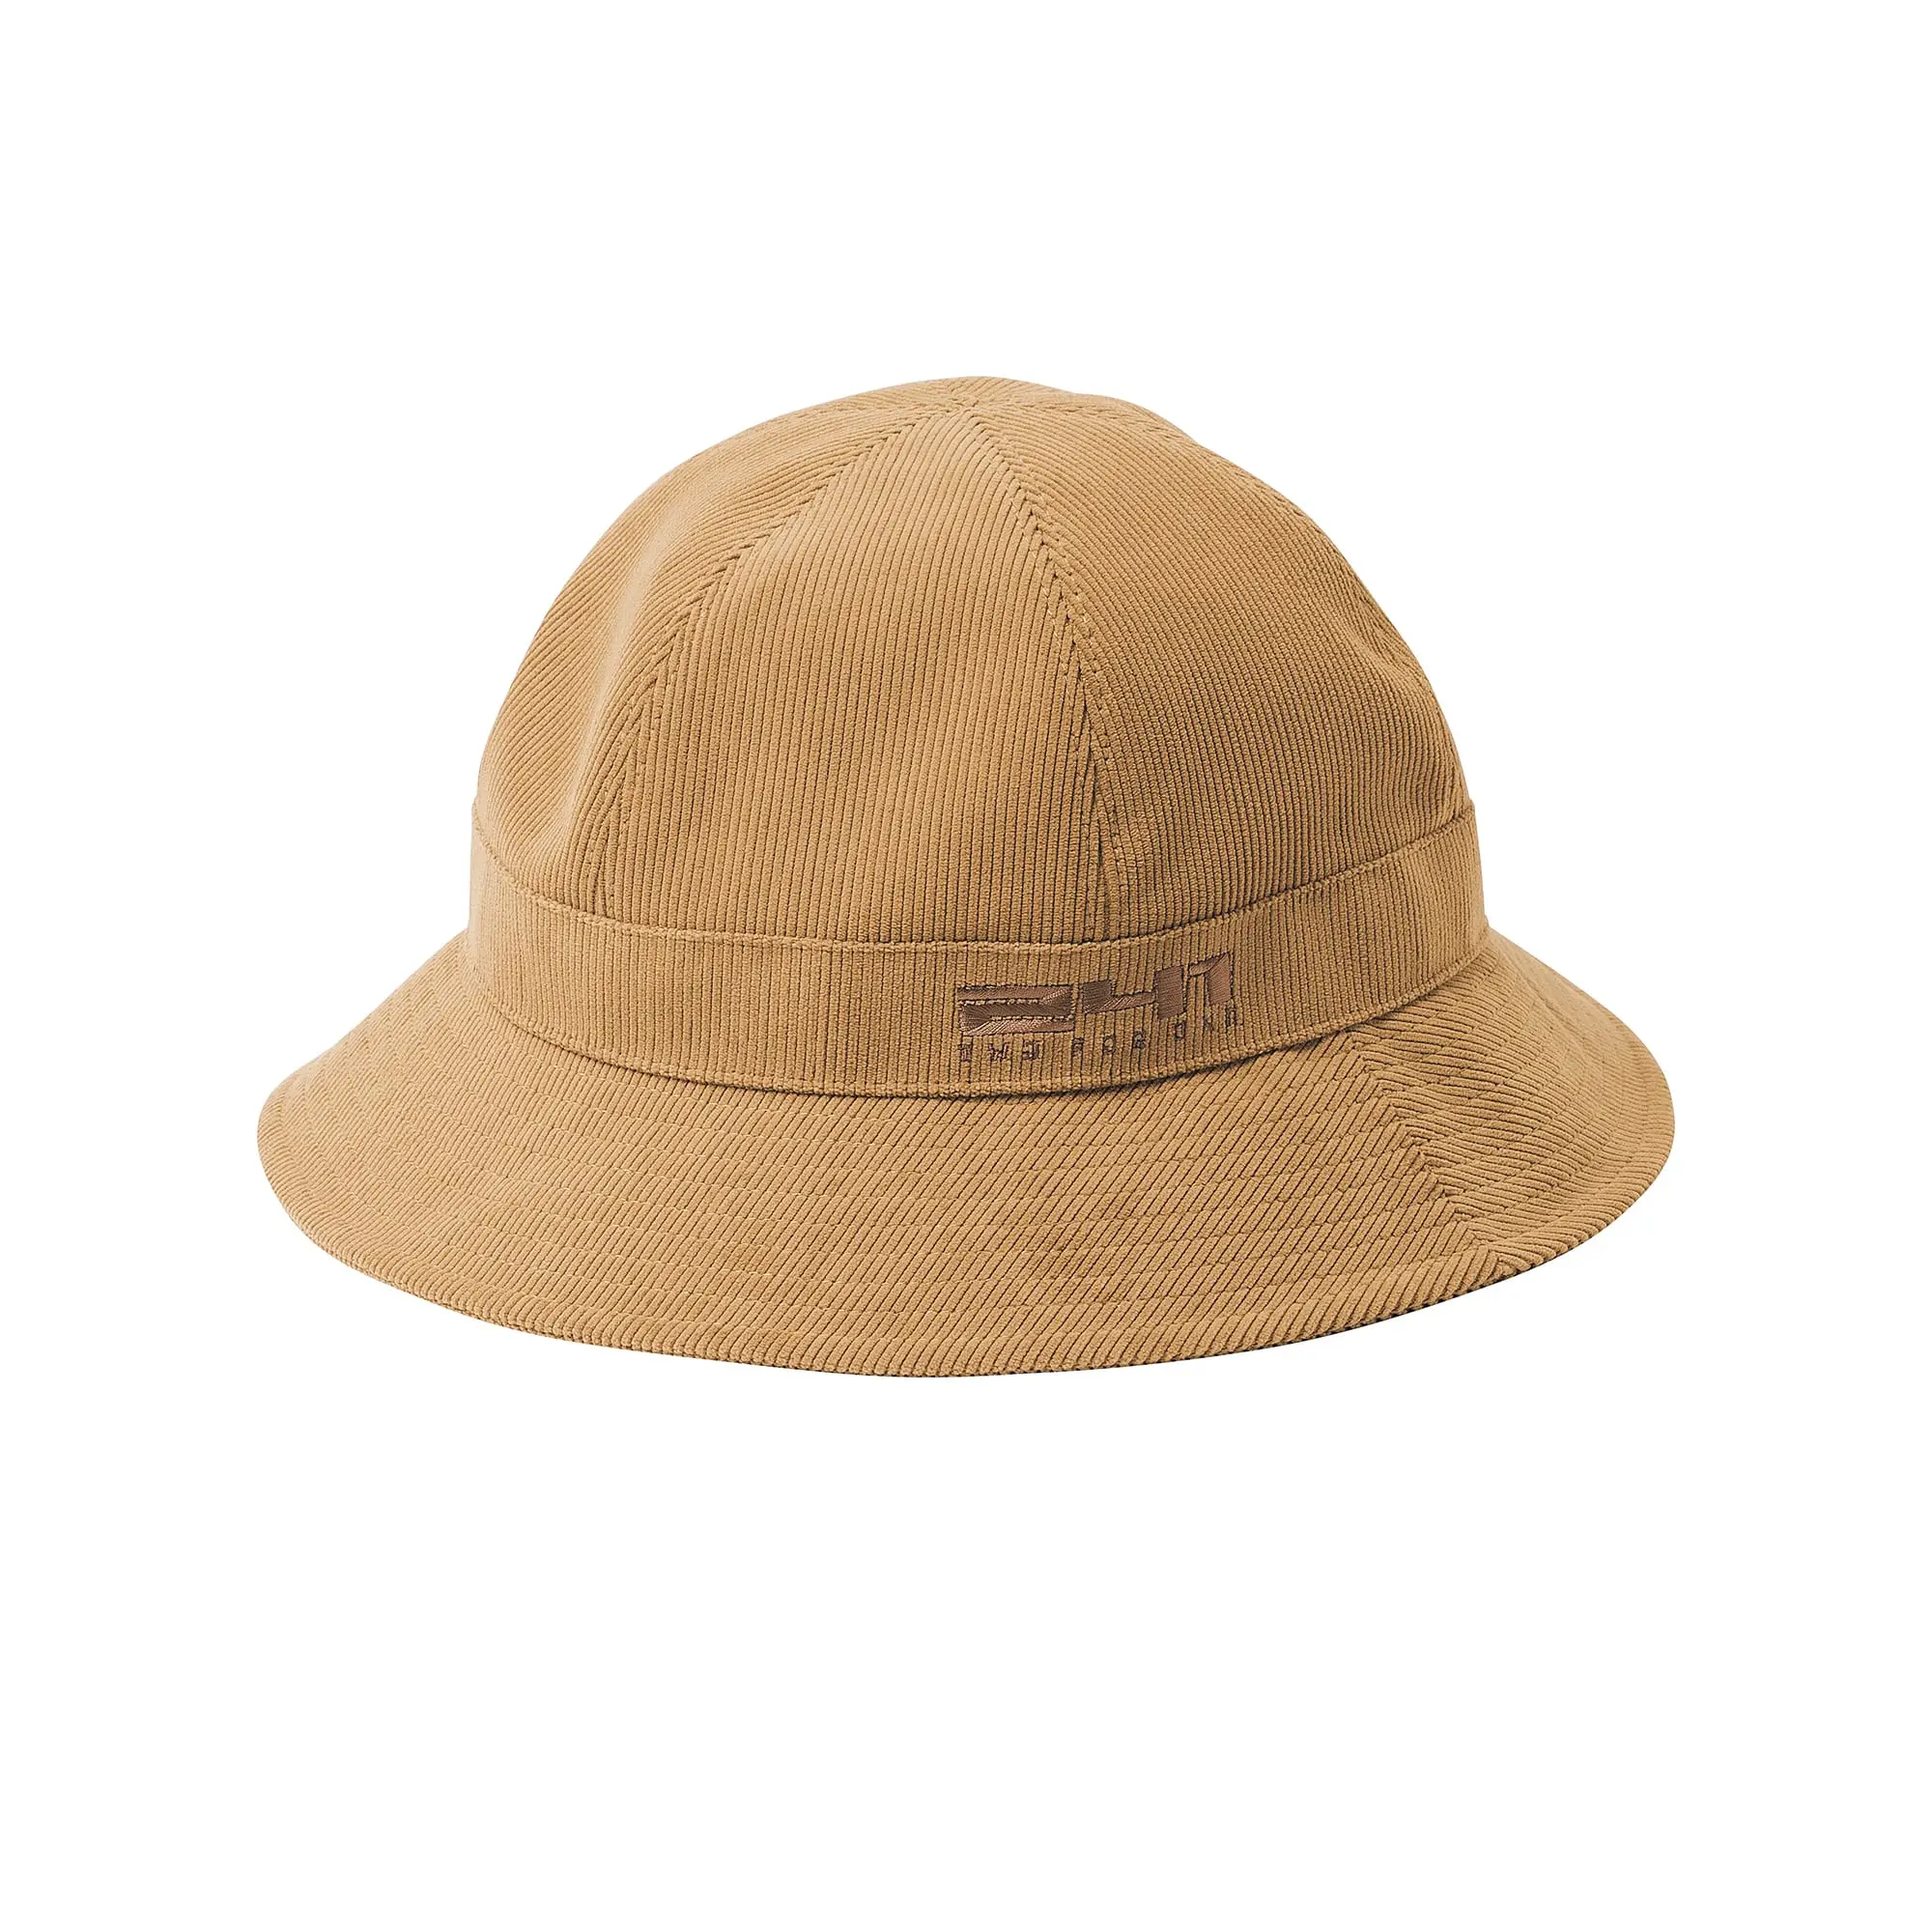 AREA241-6PANEL HAT
COLOR: GOLDEN BROWN
¥8,580（tax incl.） MB7350